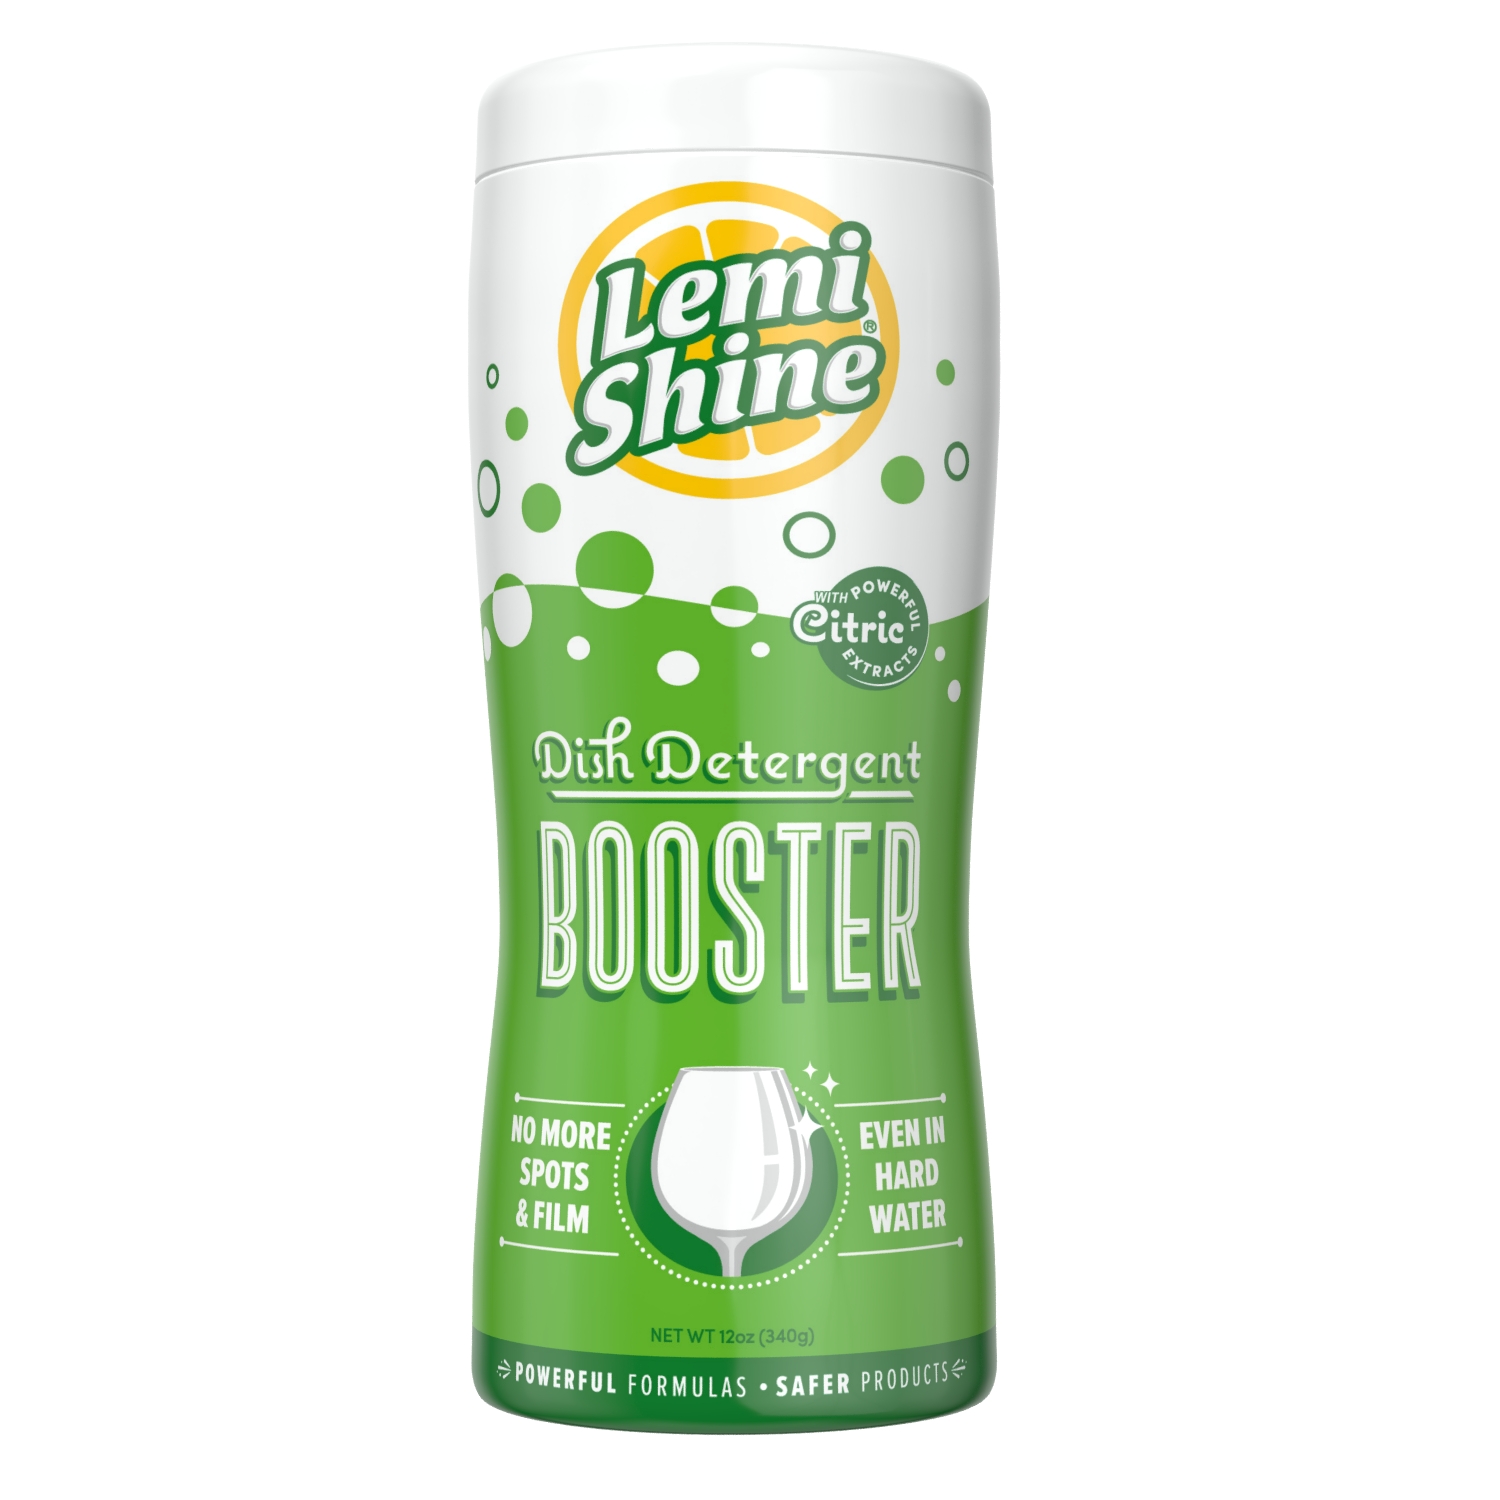 Lemi Shine Dish Detergent Booster, Gets Rid Of Hard Water Spots, 12 oz. - image 1 of 7